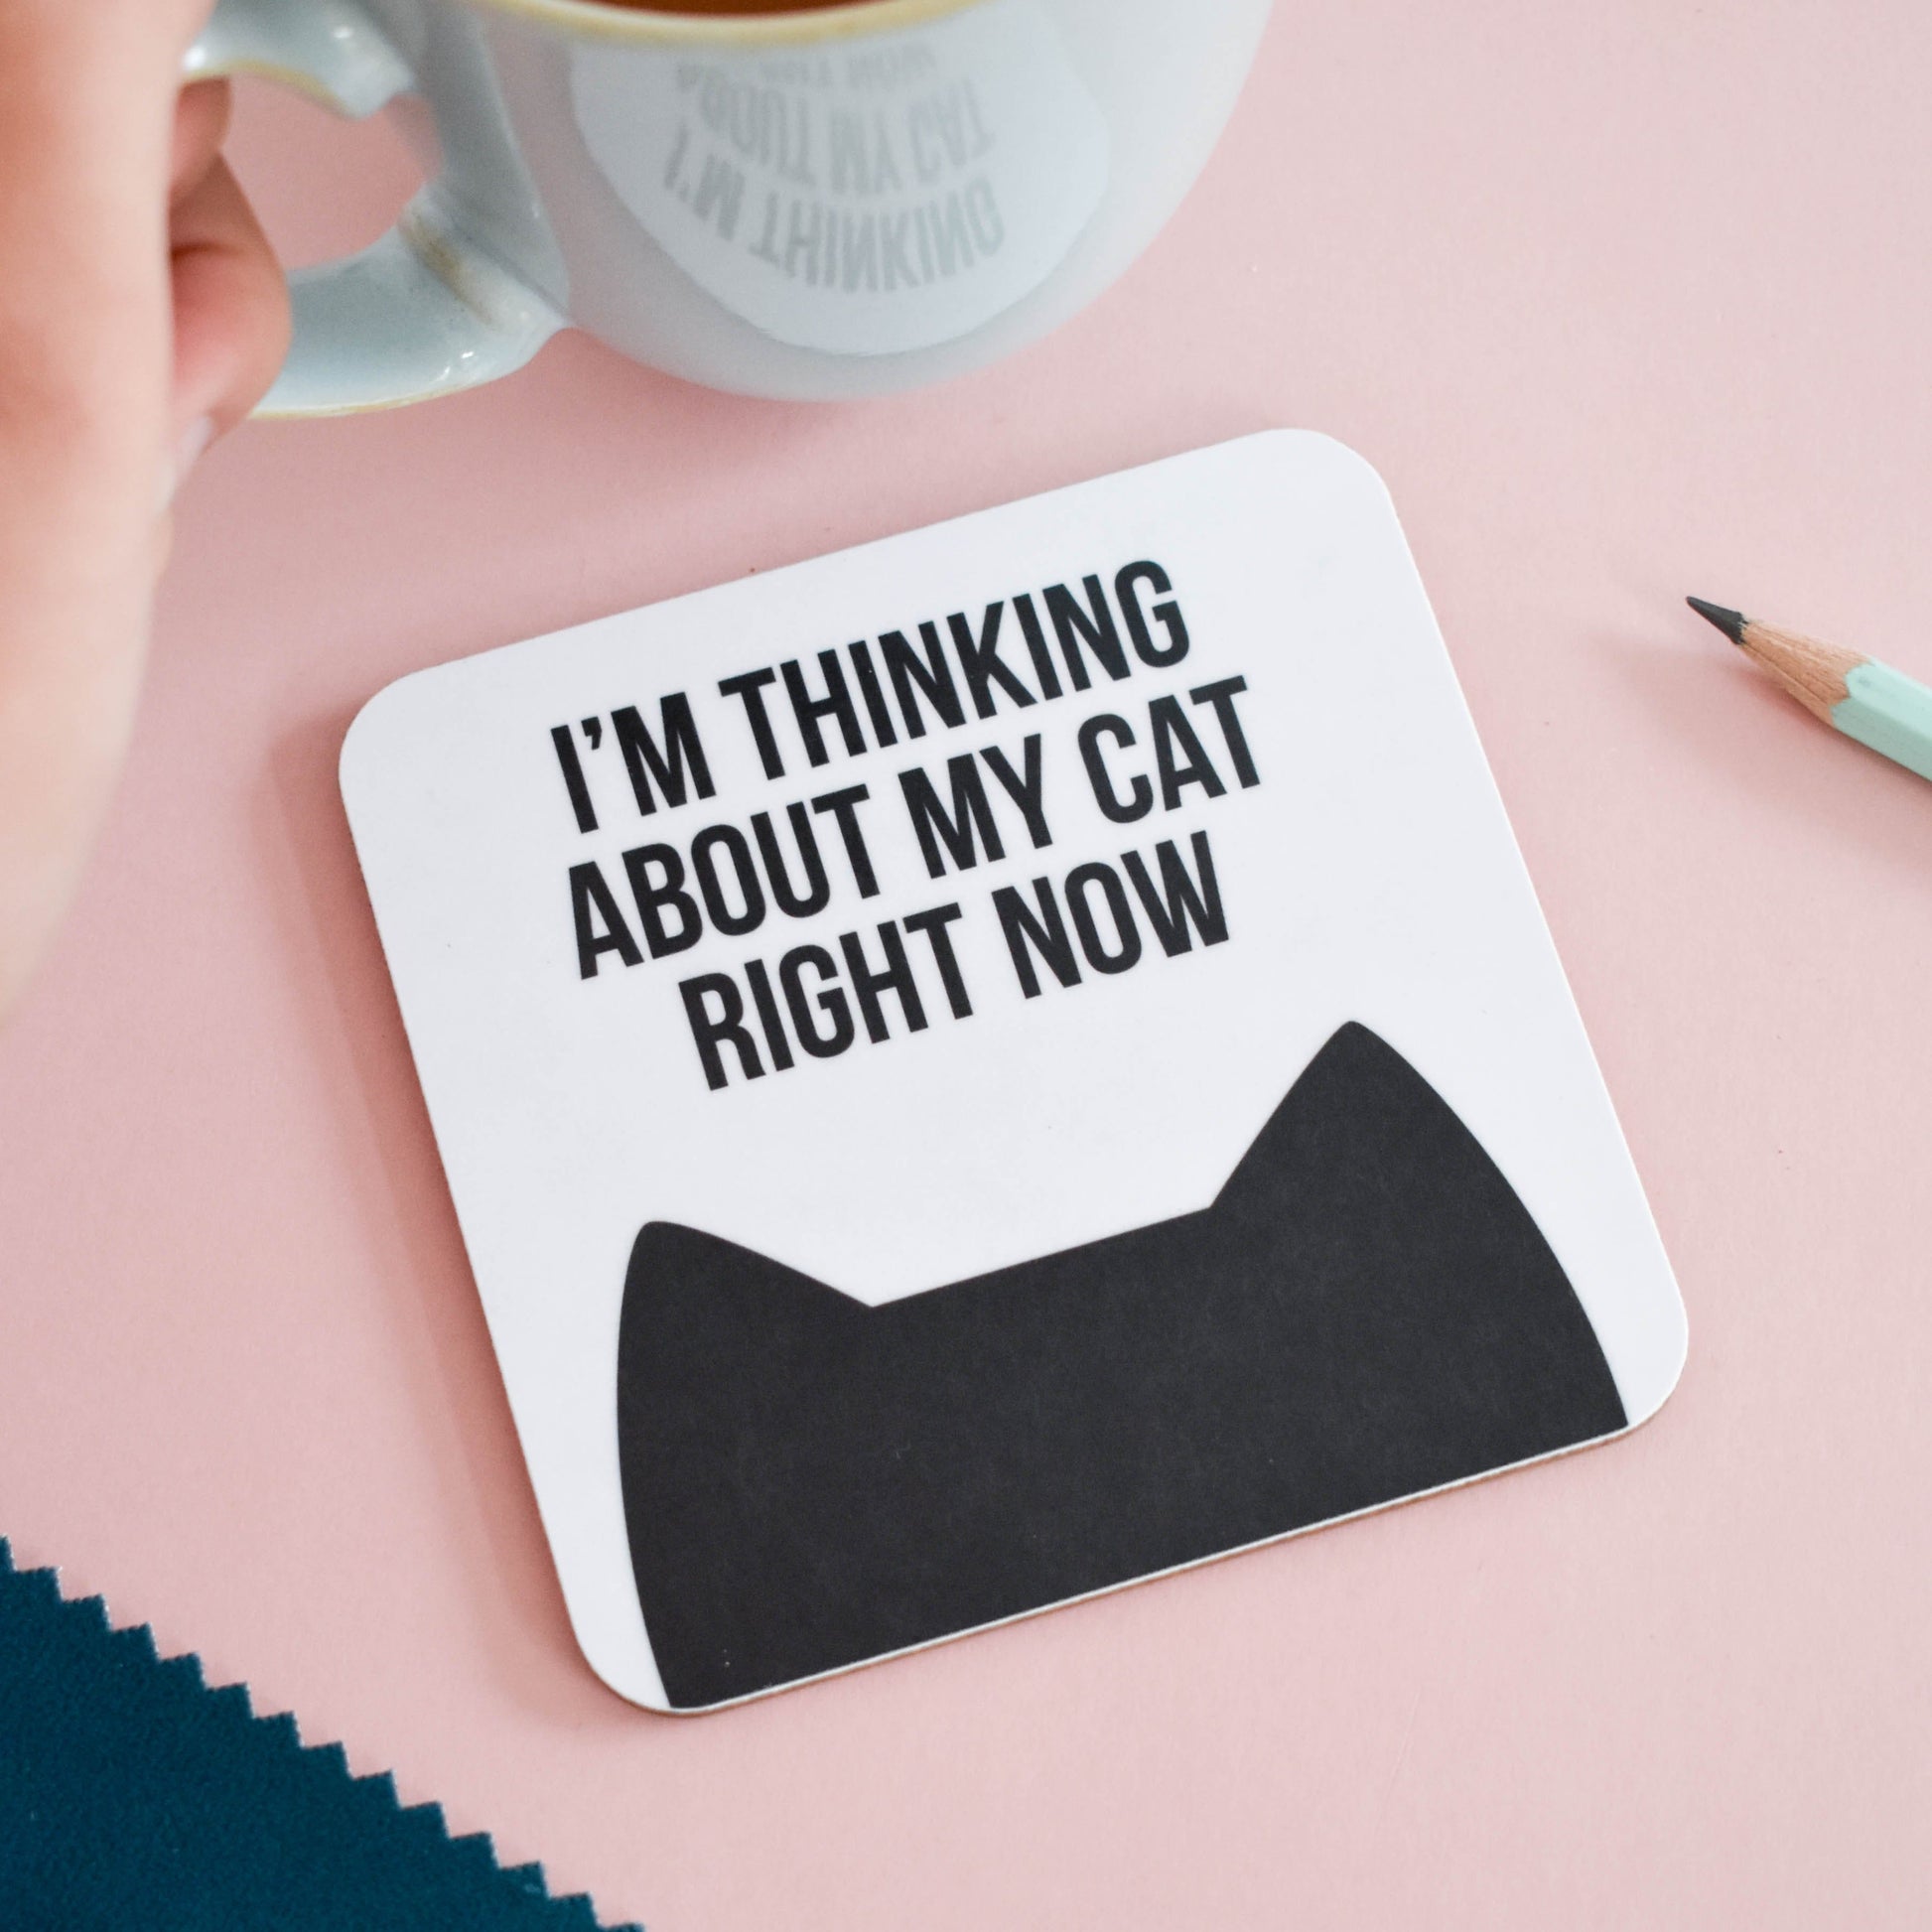 I'm thinking about my cat right now coaster from Purple Tree Designs